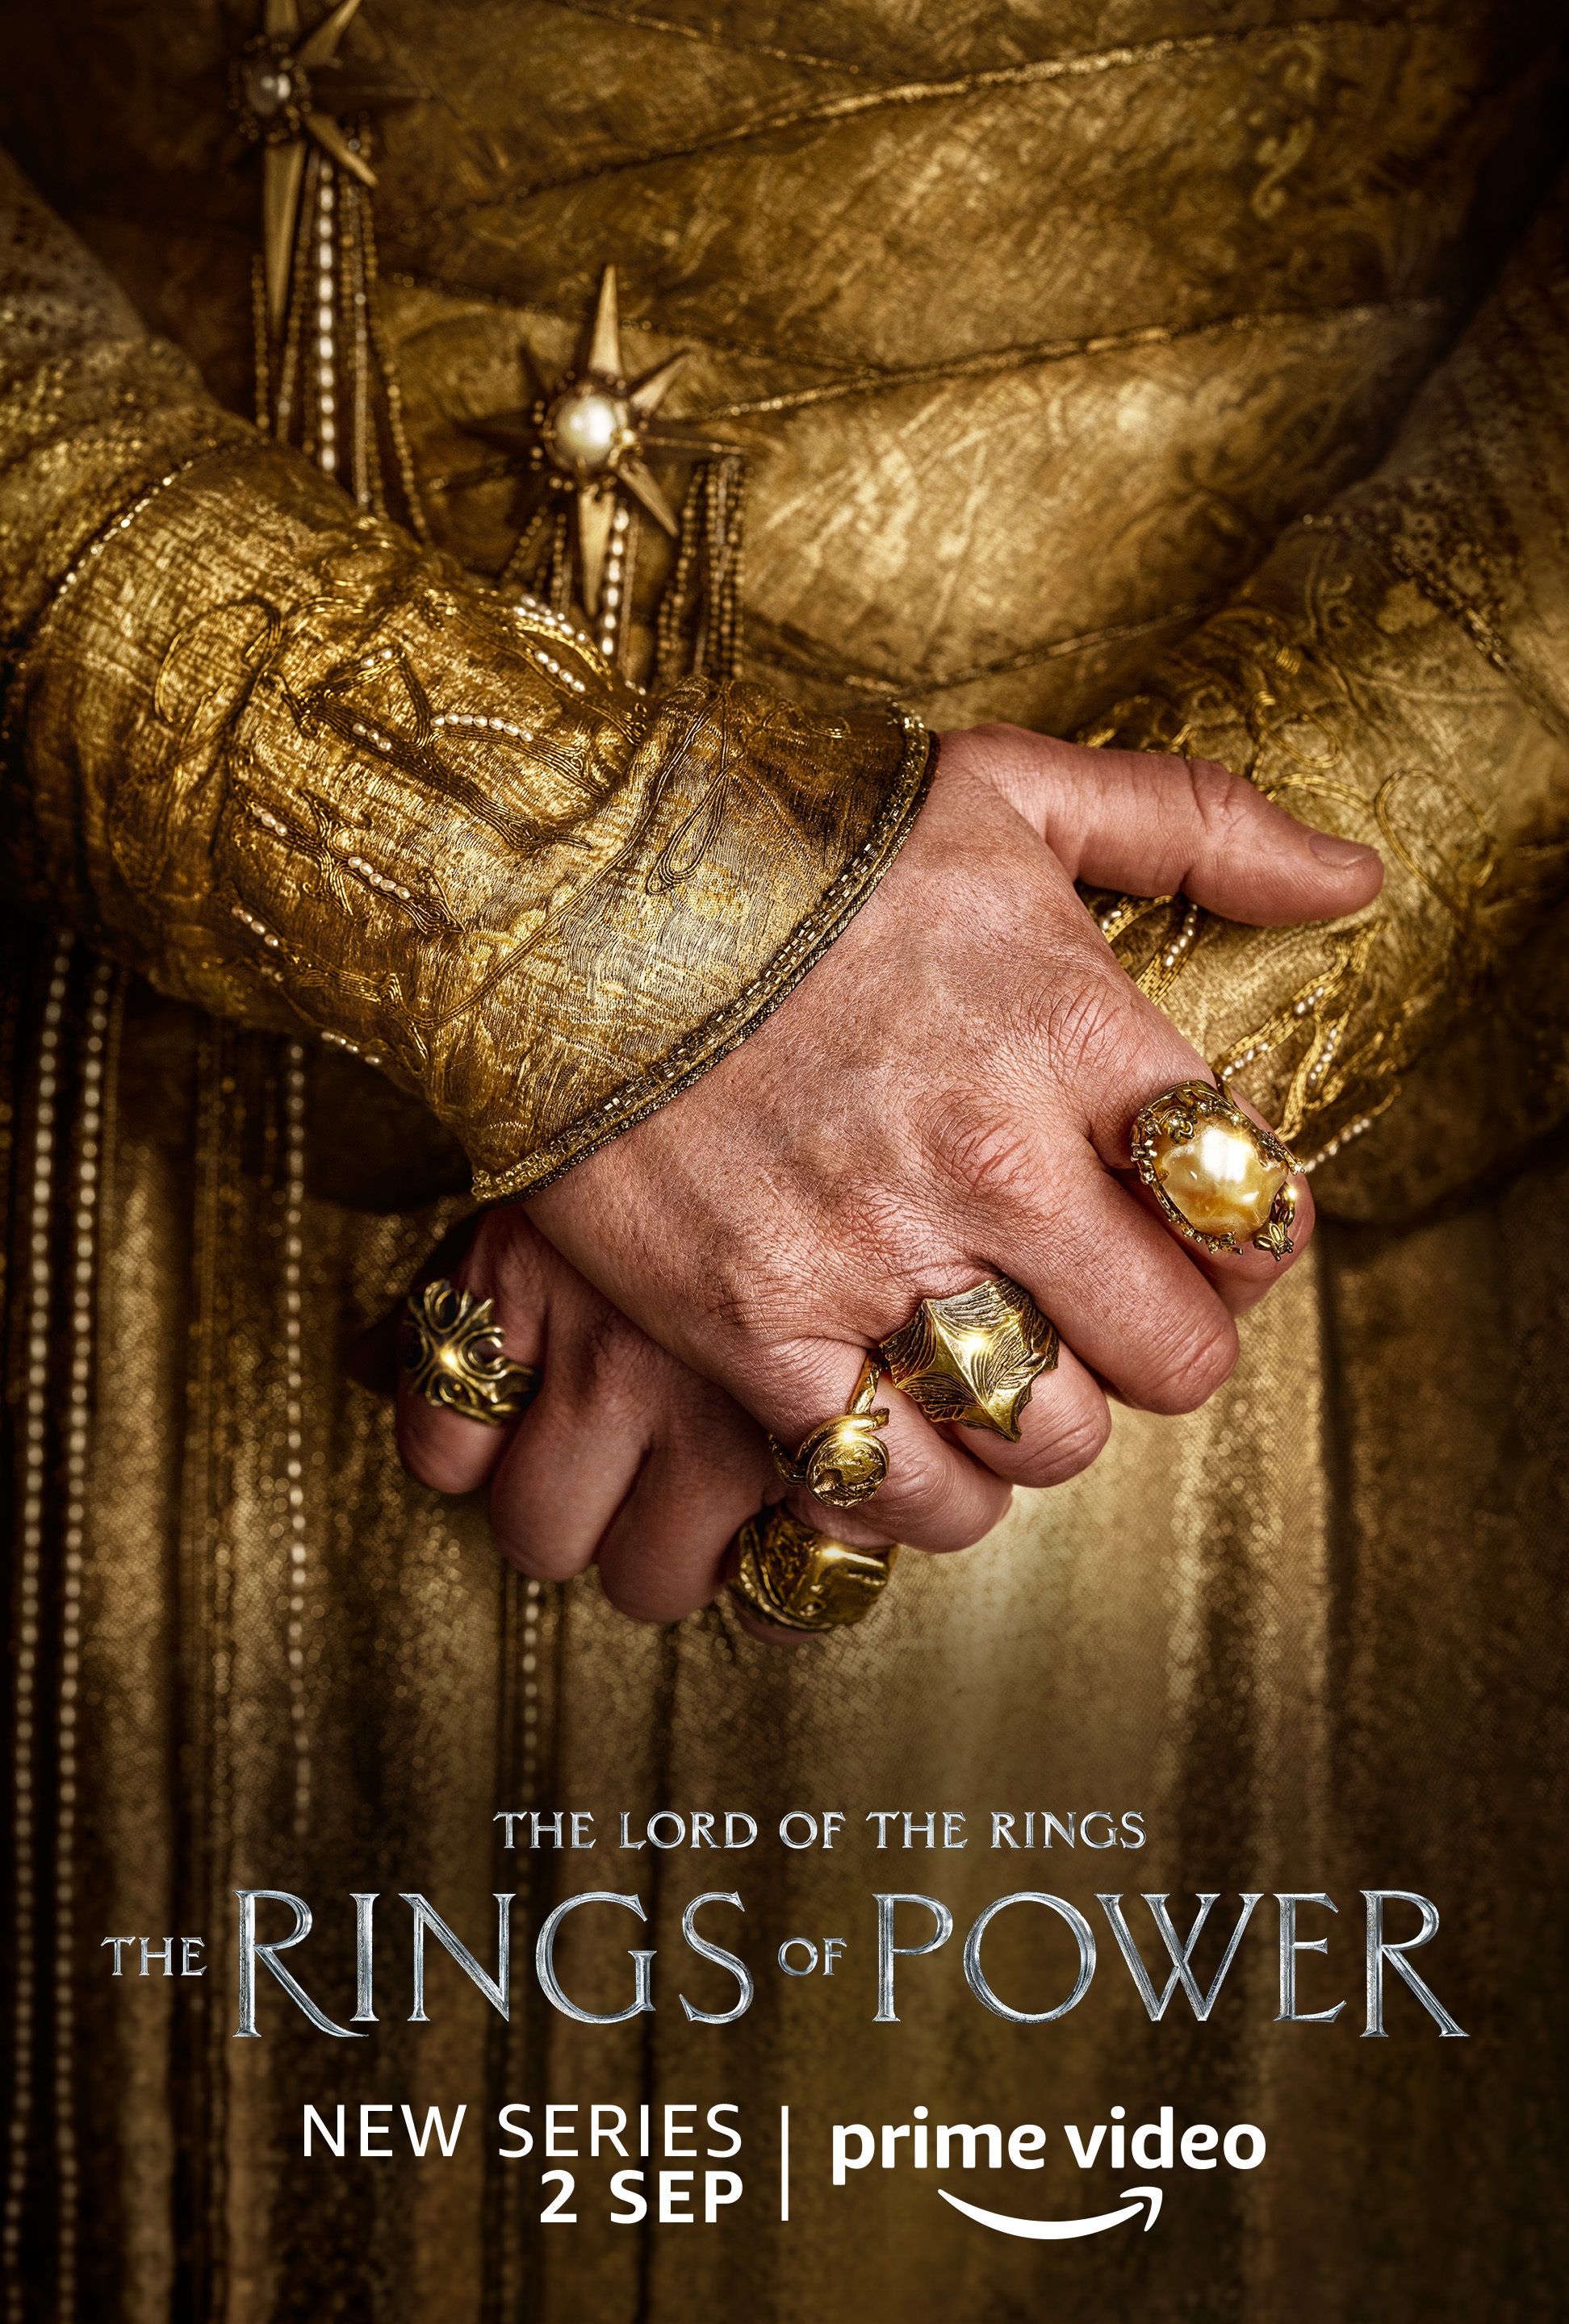 A noble human character poster for Lord of the Rings: The Rings of Power